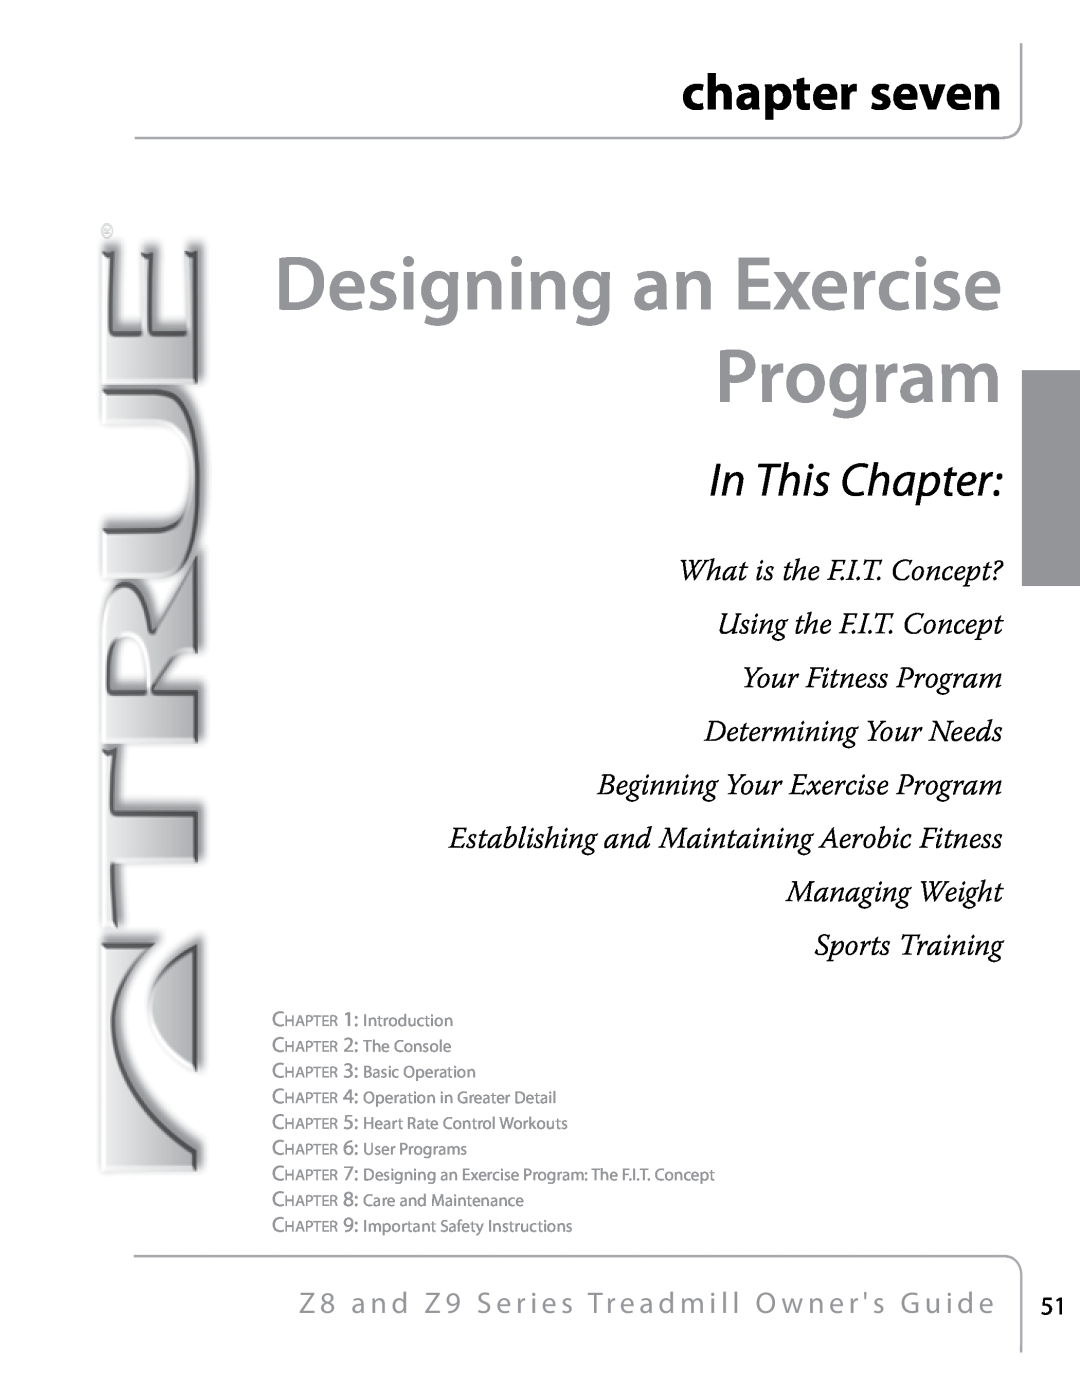 True Fitness Z9, Z8 manual chapter seven, Designing an Exercise Program, In This Chapter 